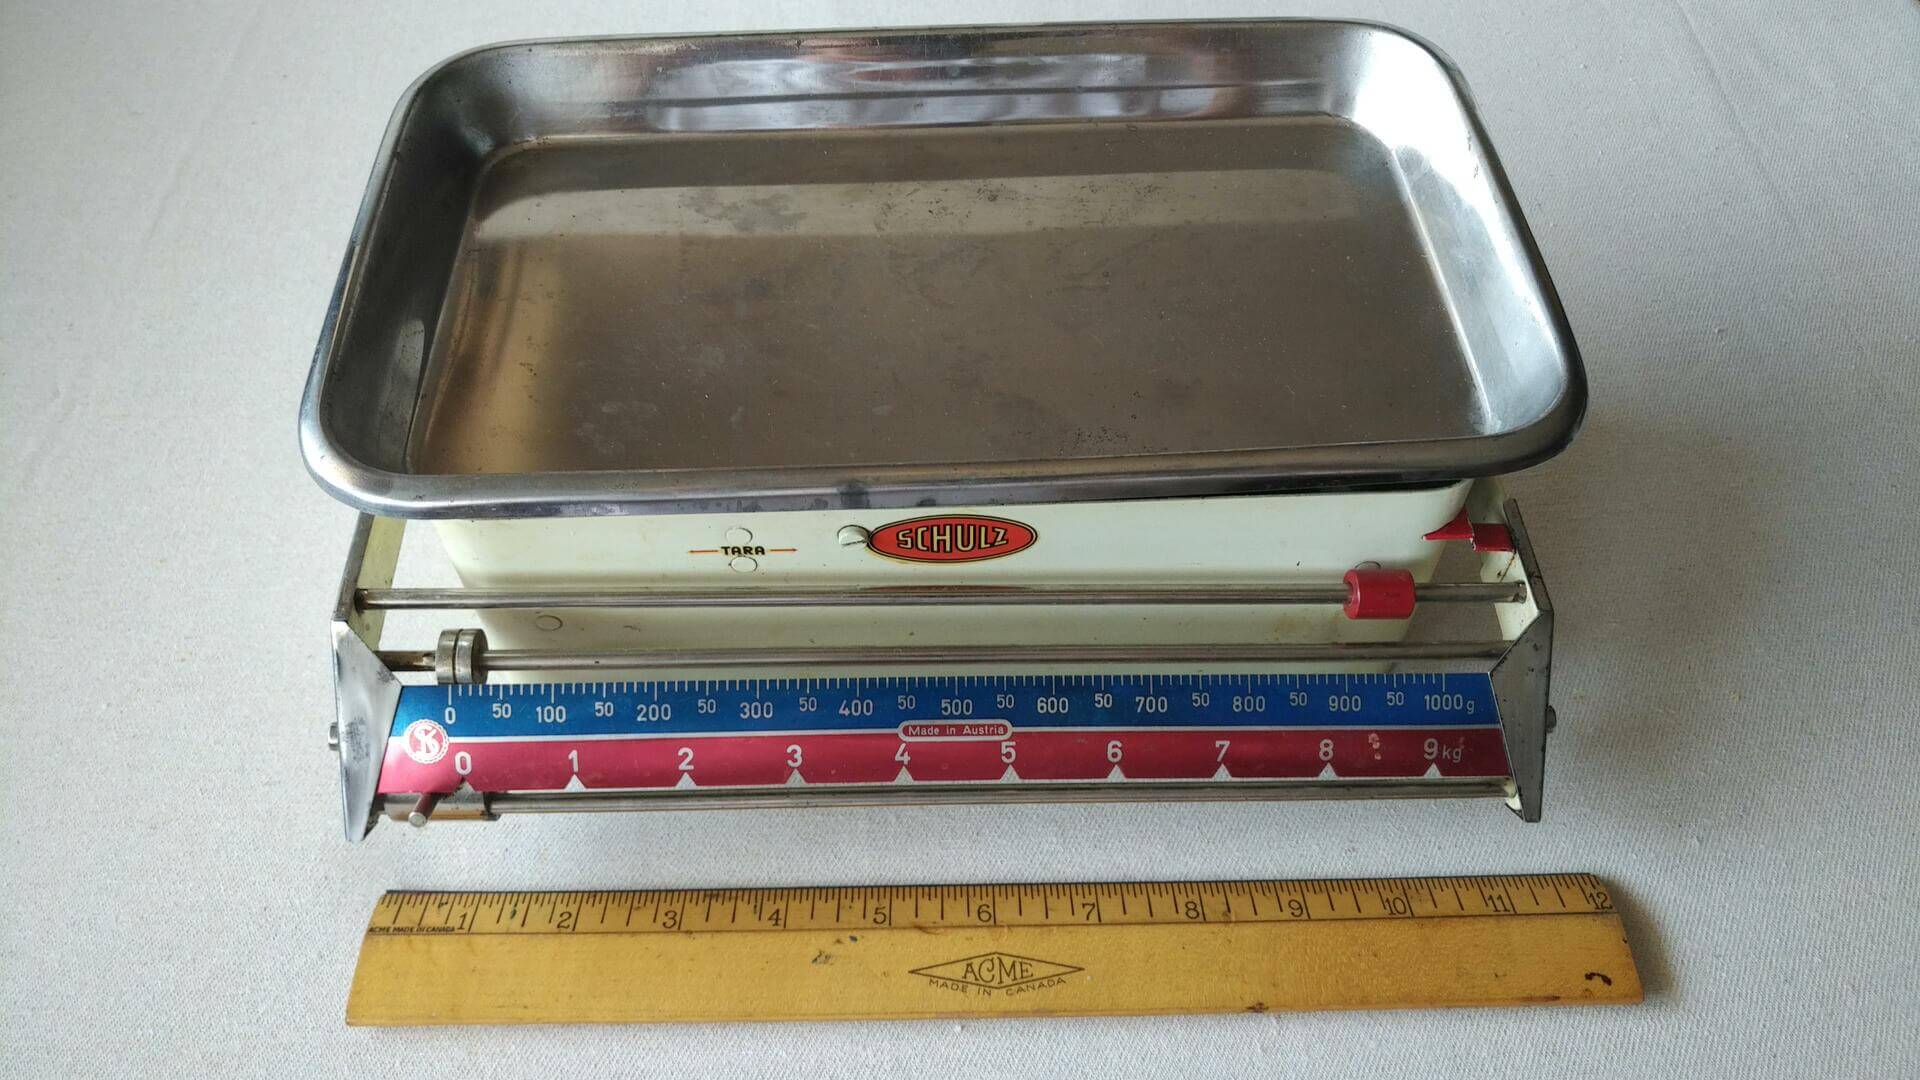 Rare vintage mechanic kitchen balance scale by Schulz Karl Wein. Antique made in Austria collectible weight measuring tools and gadgets